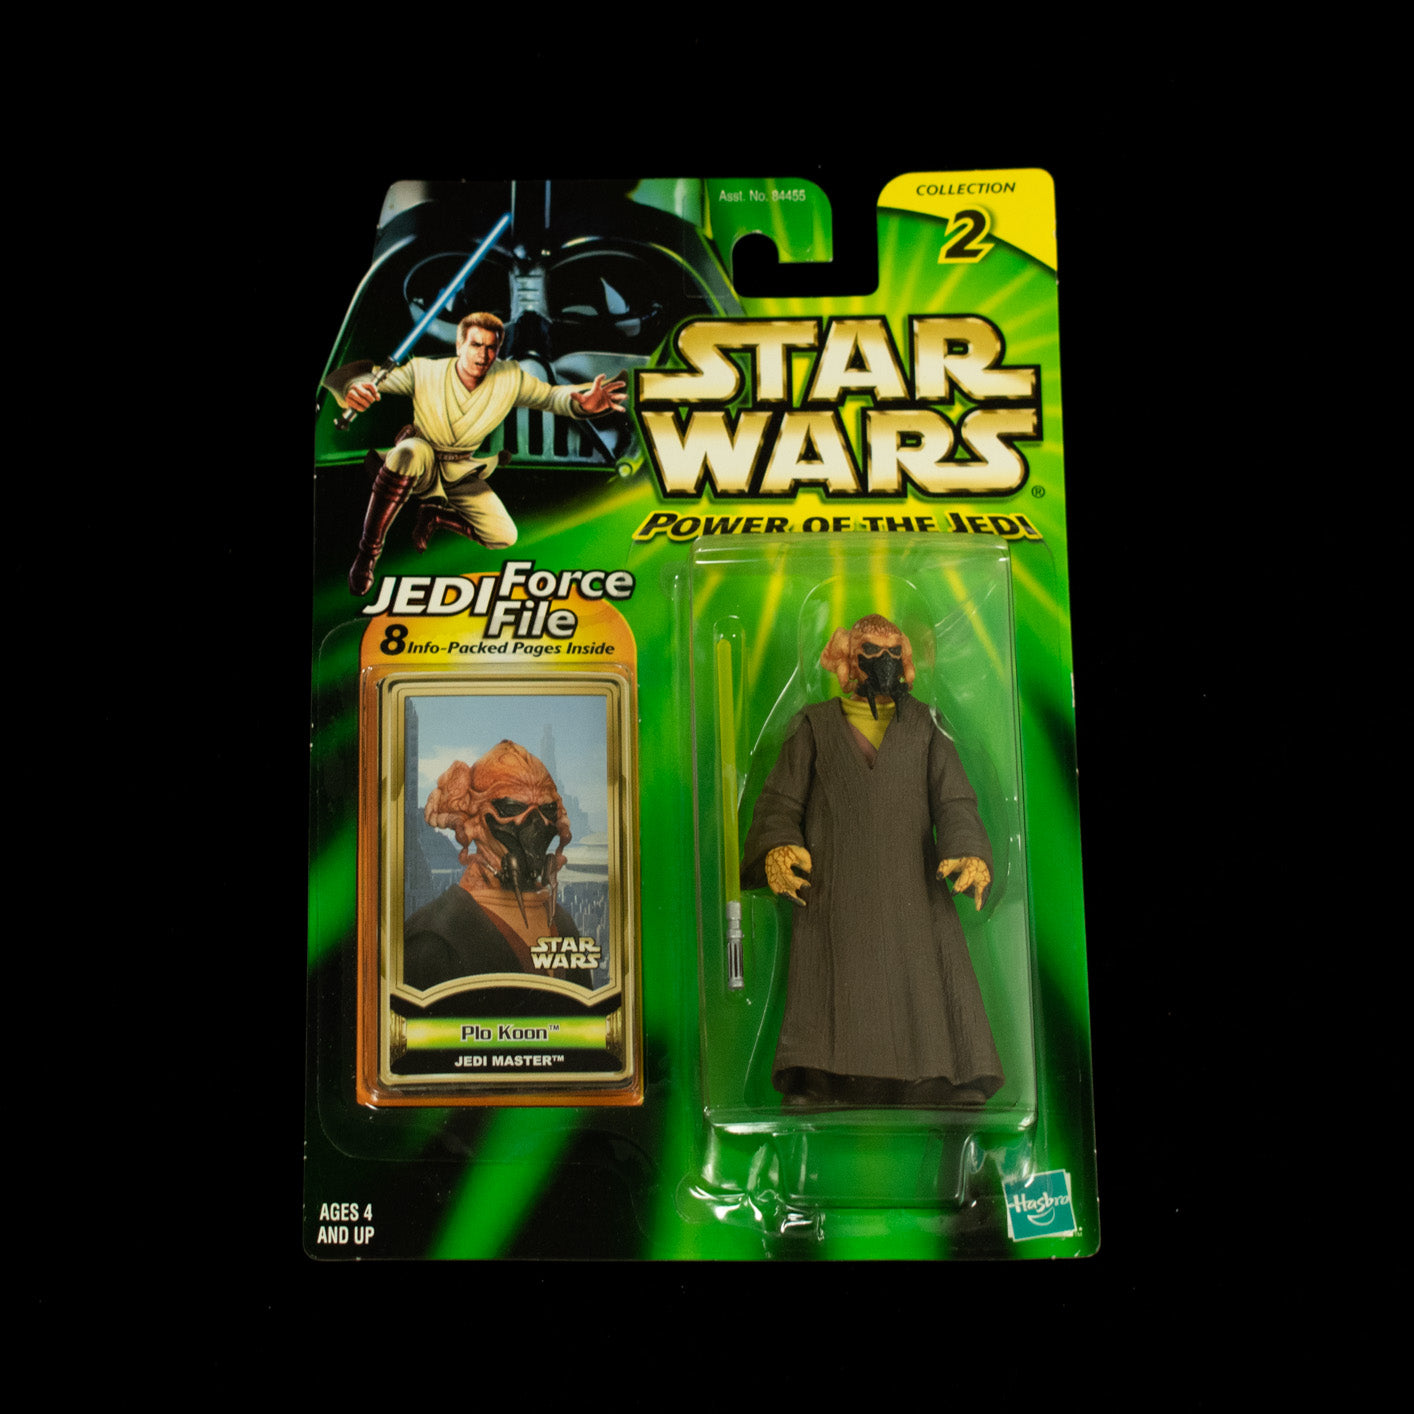 Star Wars Power of the Jedi Action Figure Plo Koon Jedi Master Collection 2